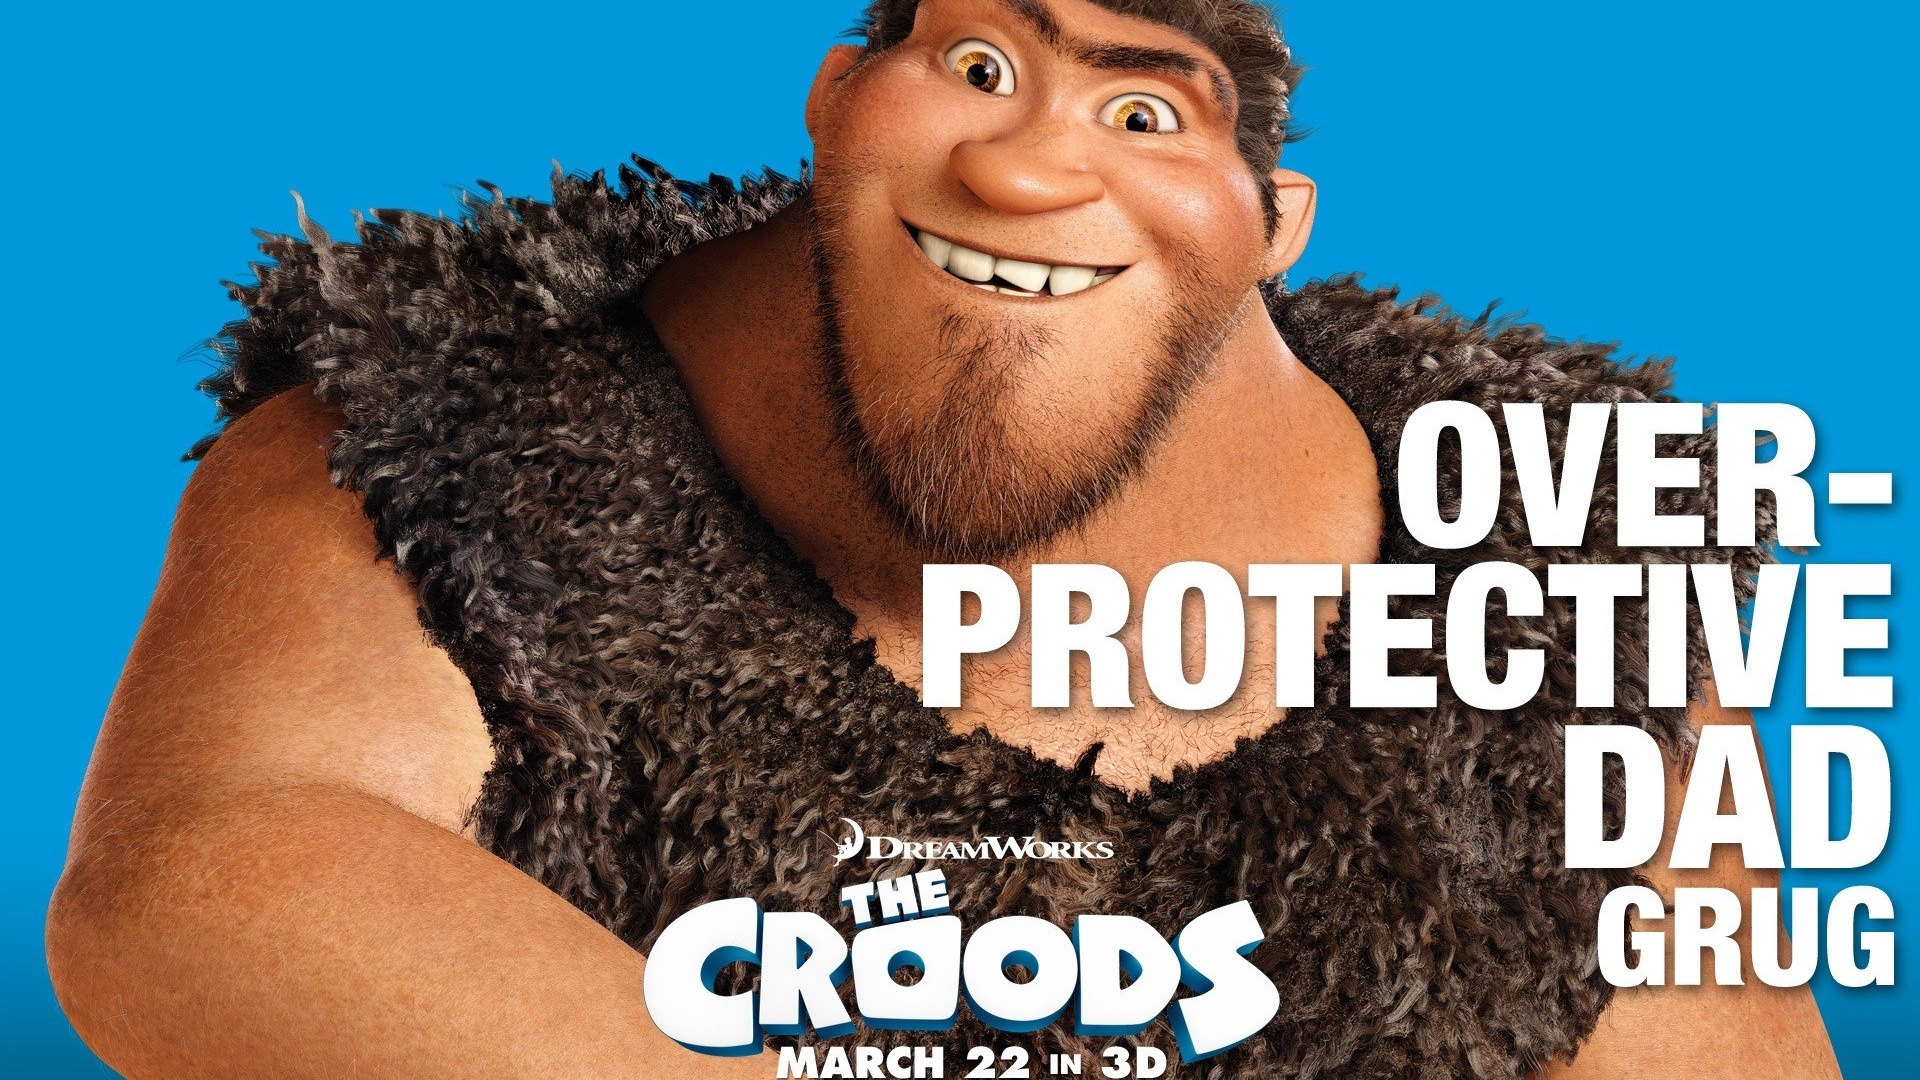 The Croods HD movie wallpapers #11 - 1920x1080